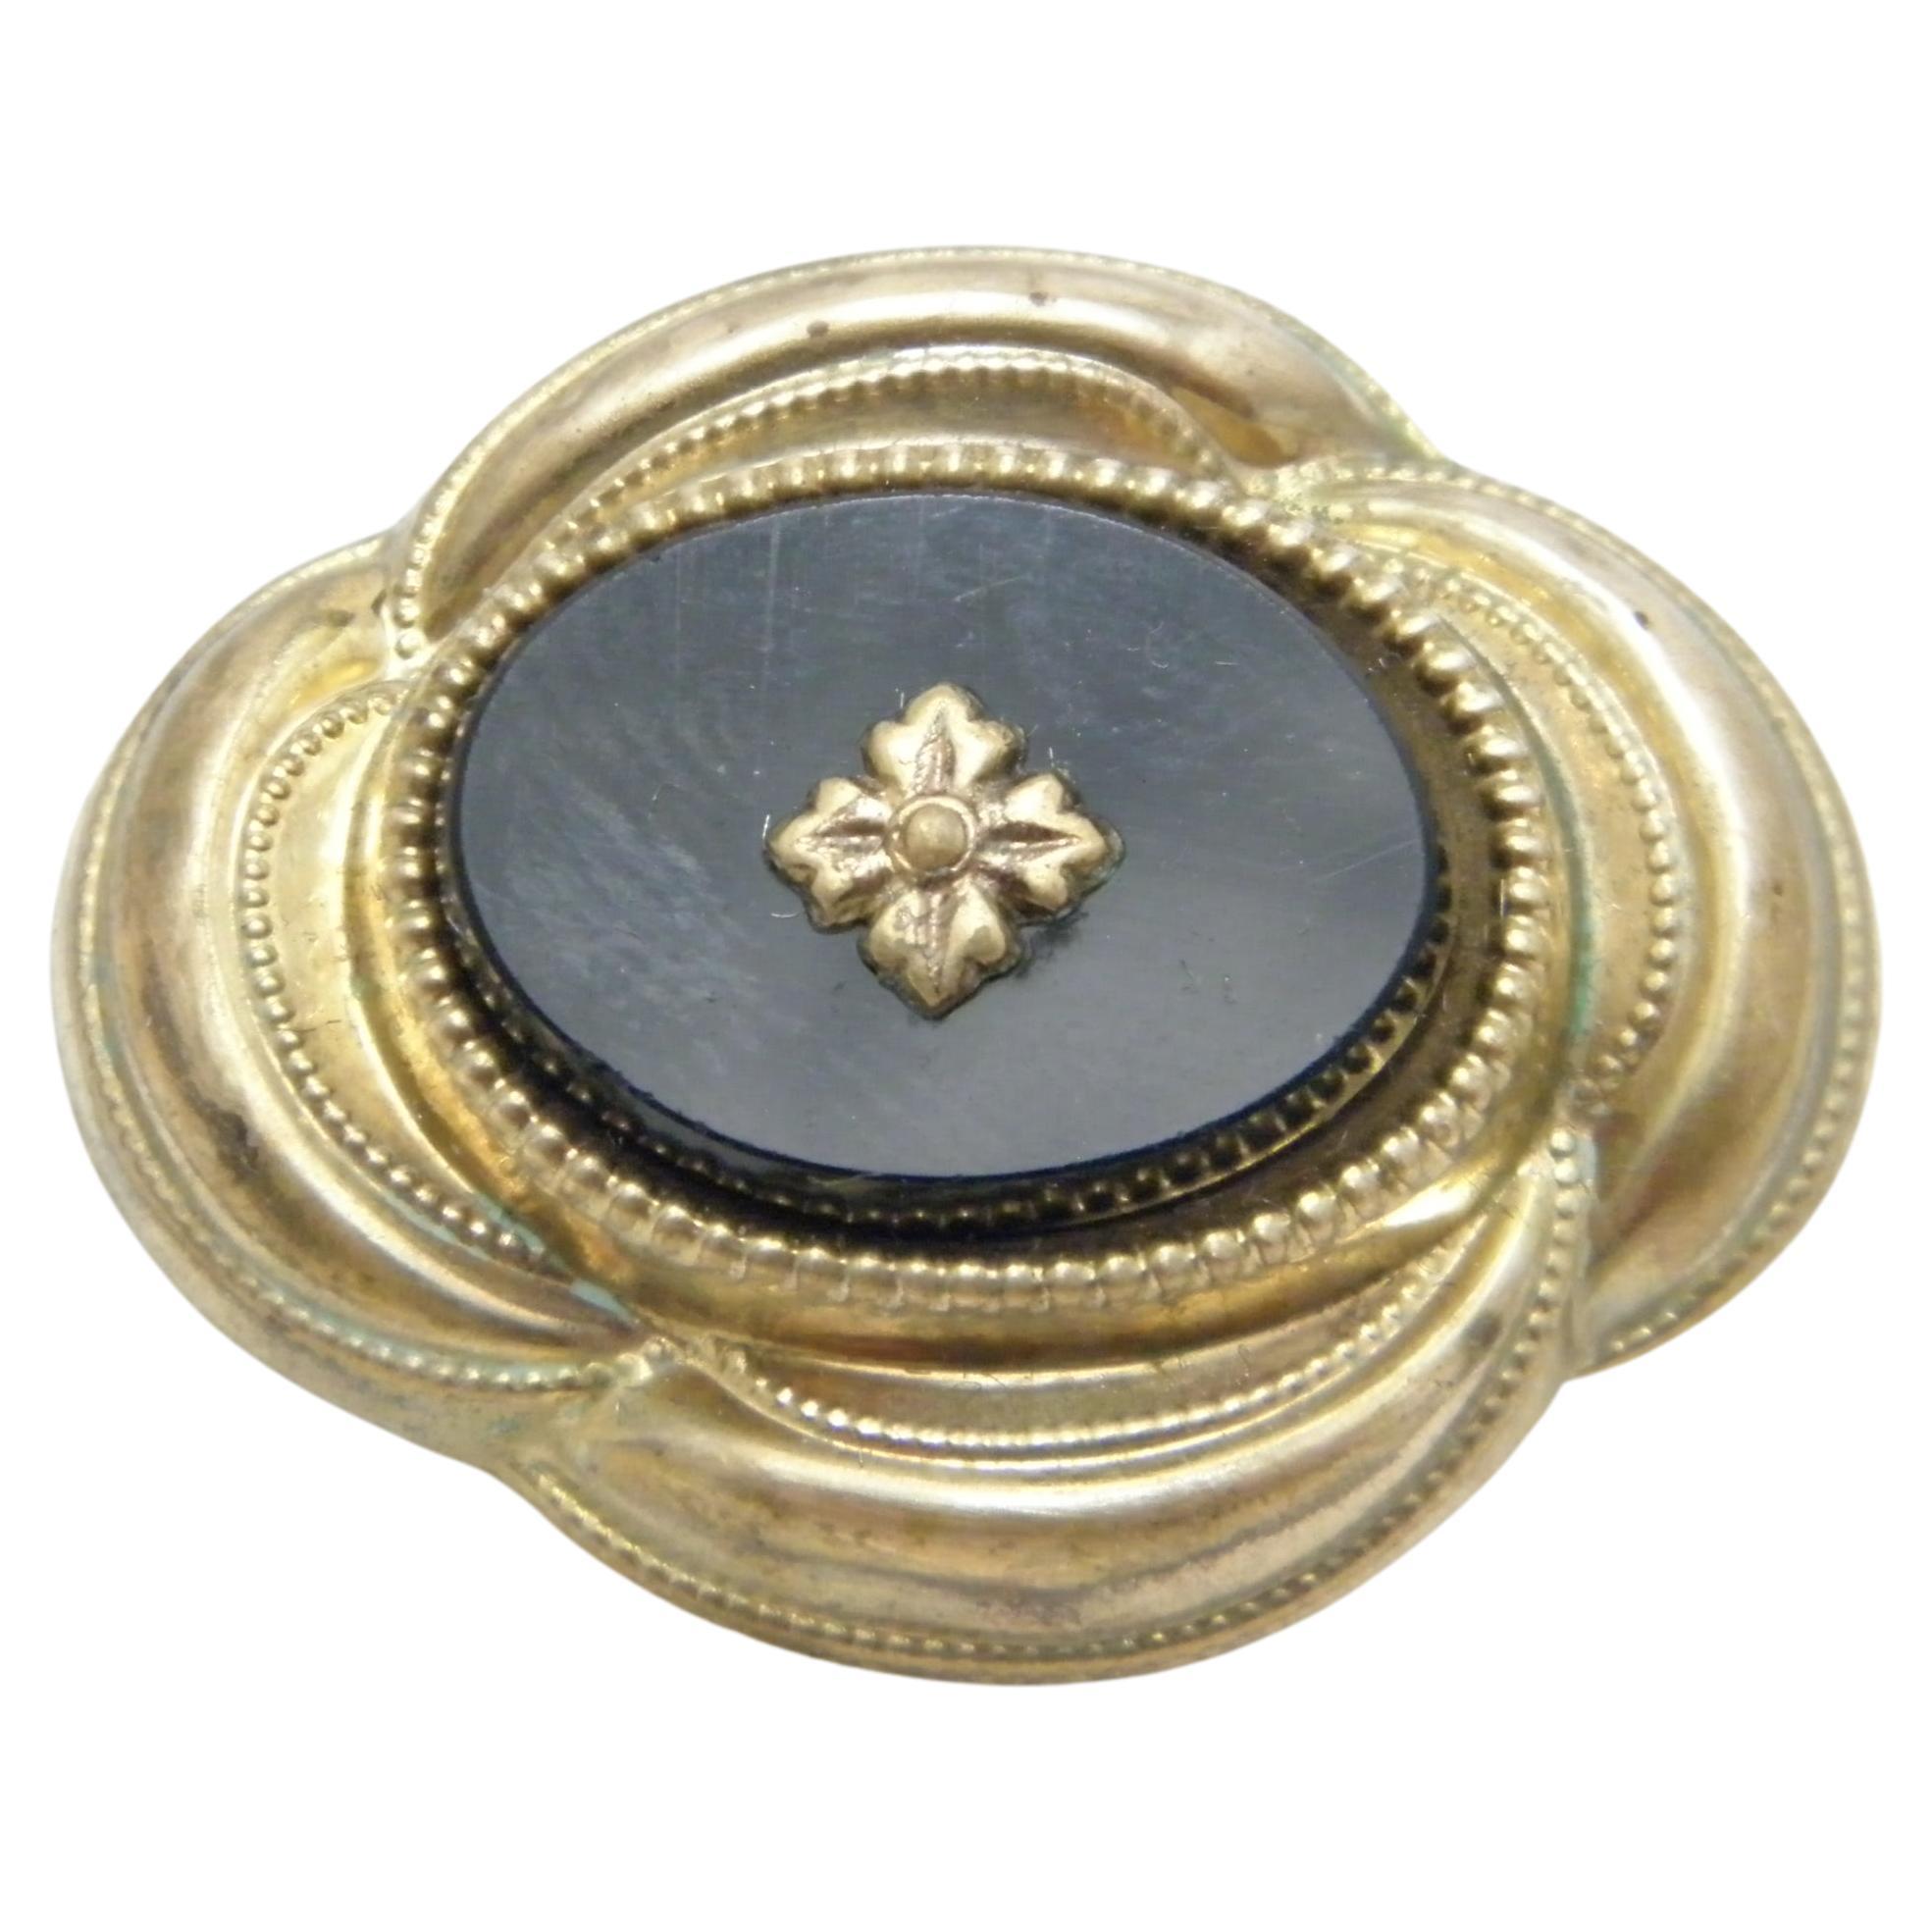 Bargain Antique 9ct Gold Onyx Mourning Brooch Pin c1880 375 Purity Victorian For Sale